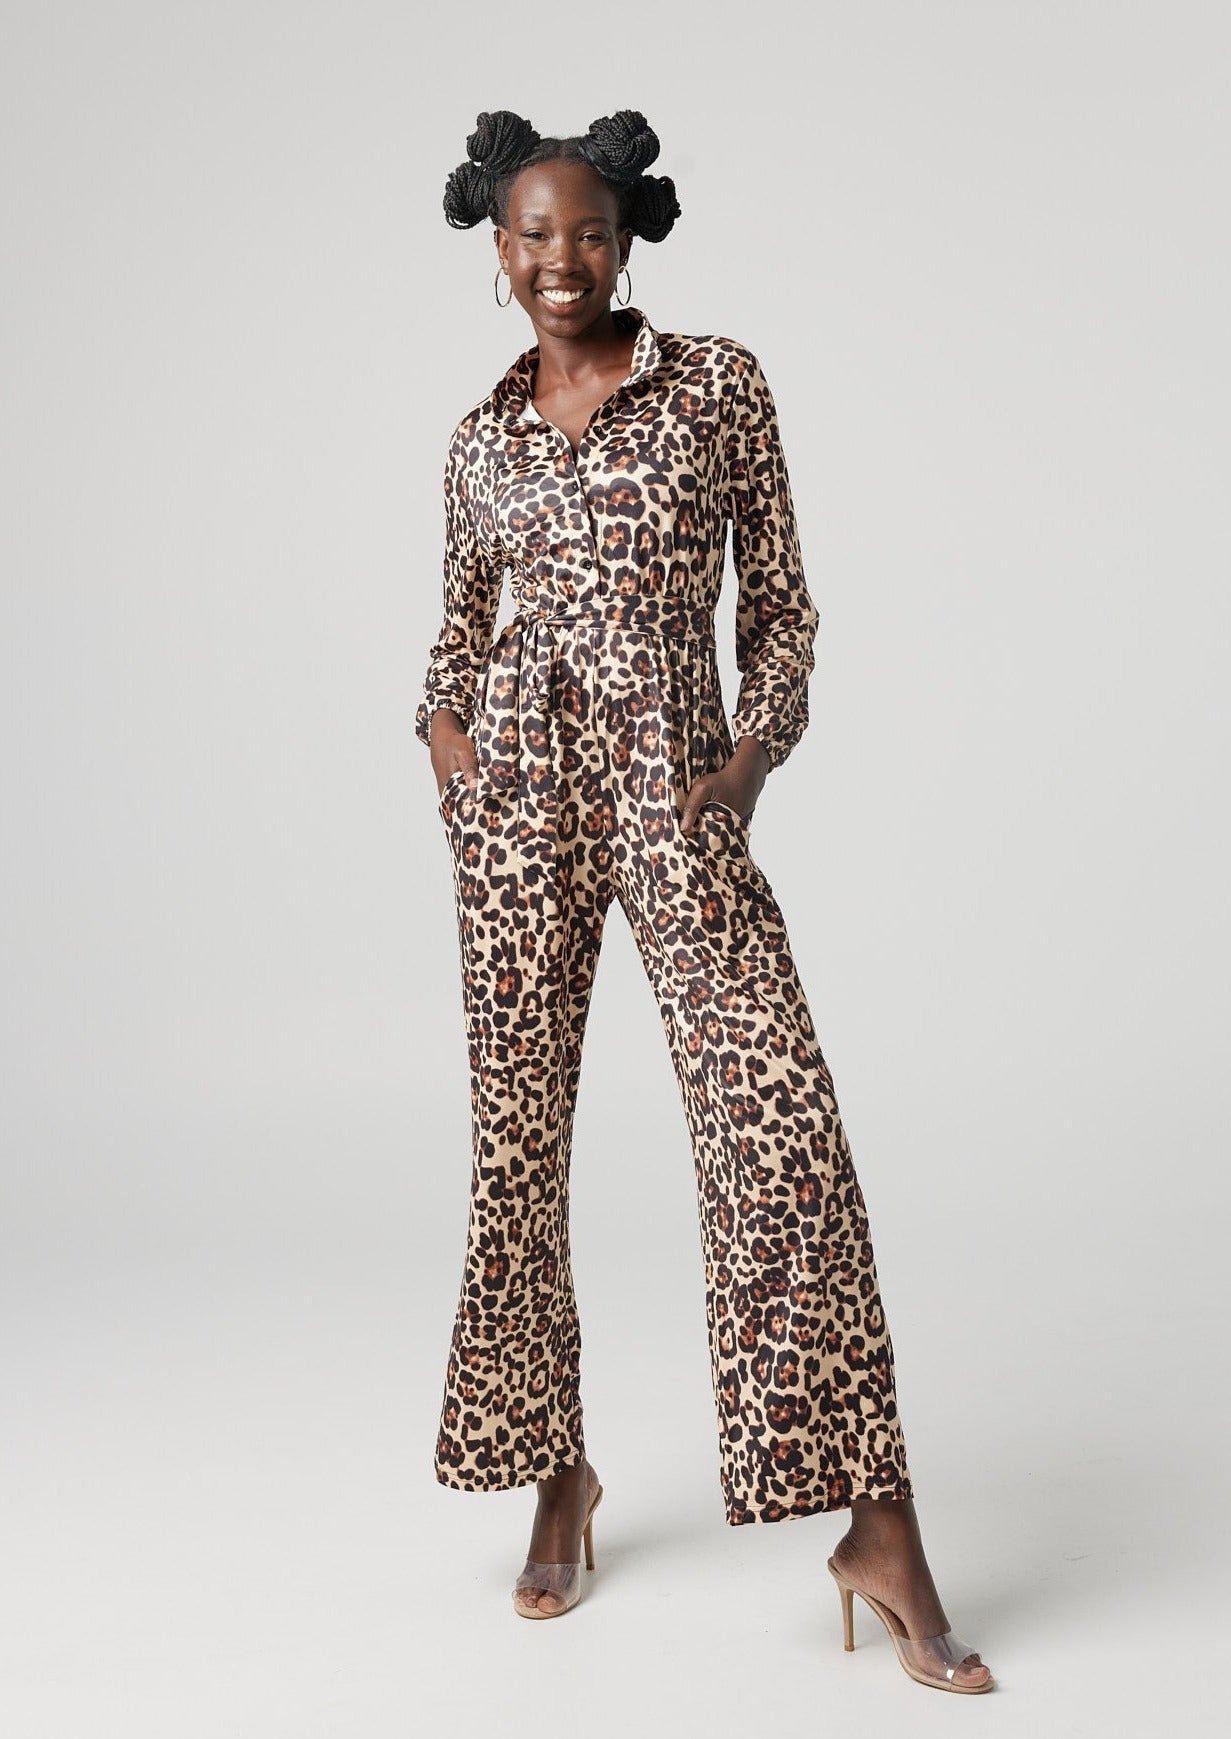 "Ready Set Go" Jumpsuit Leopard / Black-Why Mary-stride